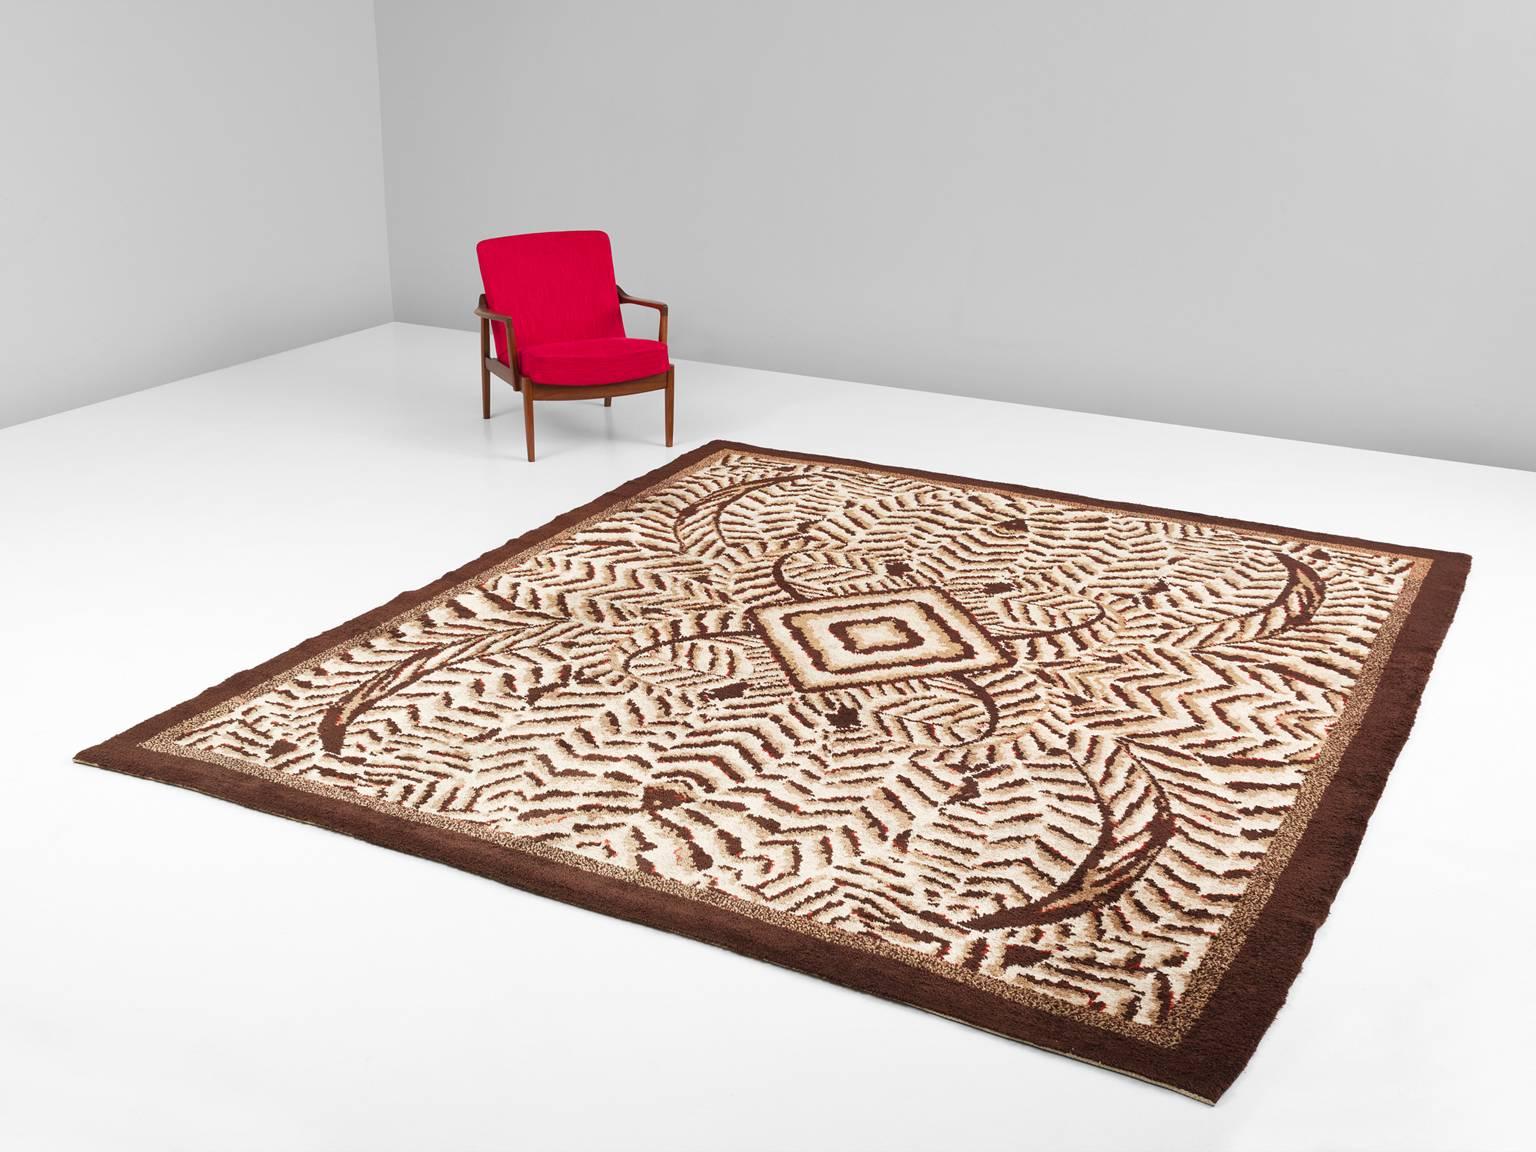 Tapestry, in wool, by M. Grootaerts for De Coene, Belgium, 1933.

Exceptional brown colored carpet designed by M. Grootaerts for the company of De Coene in Belgium. The tapestry is decorated with a scarab pattern. Brown geometric patterns are